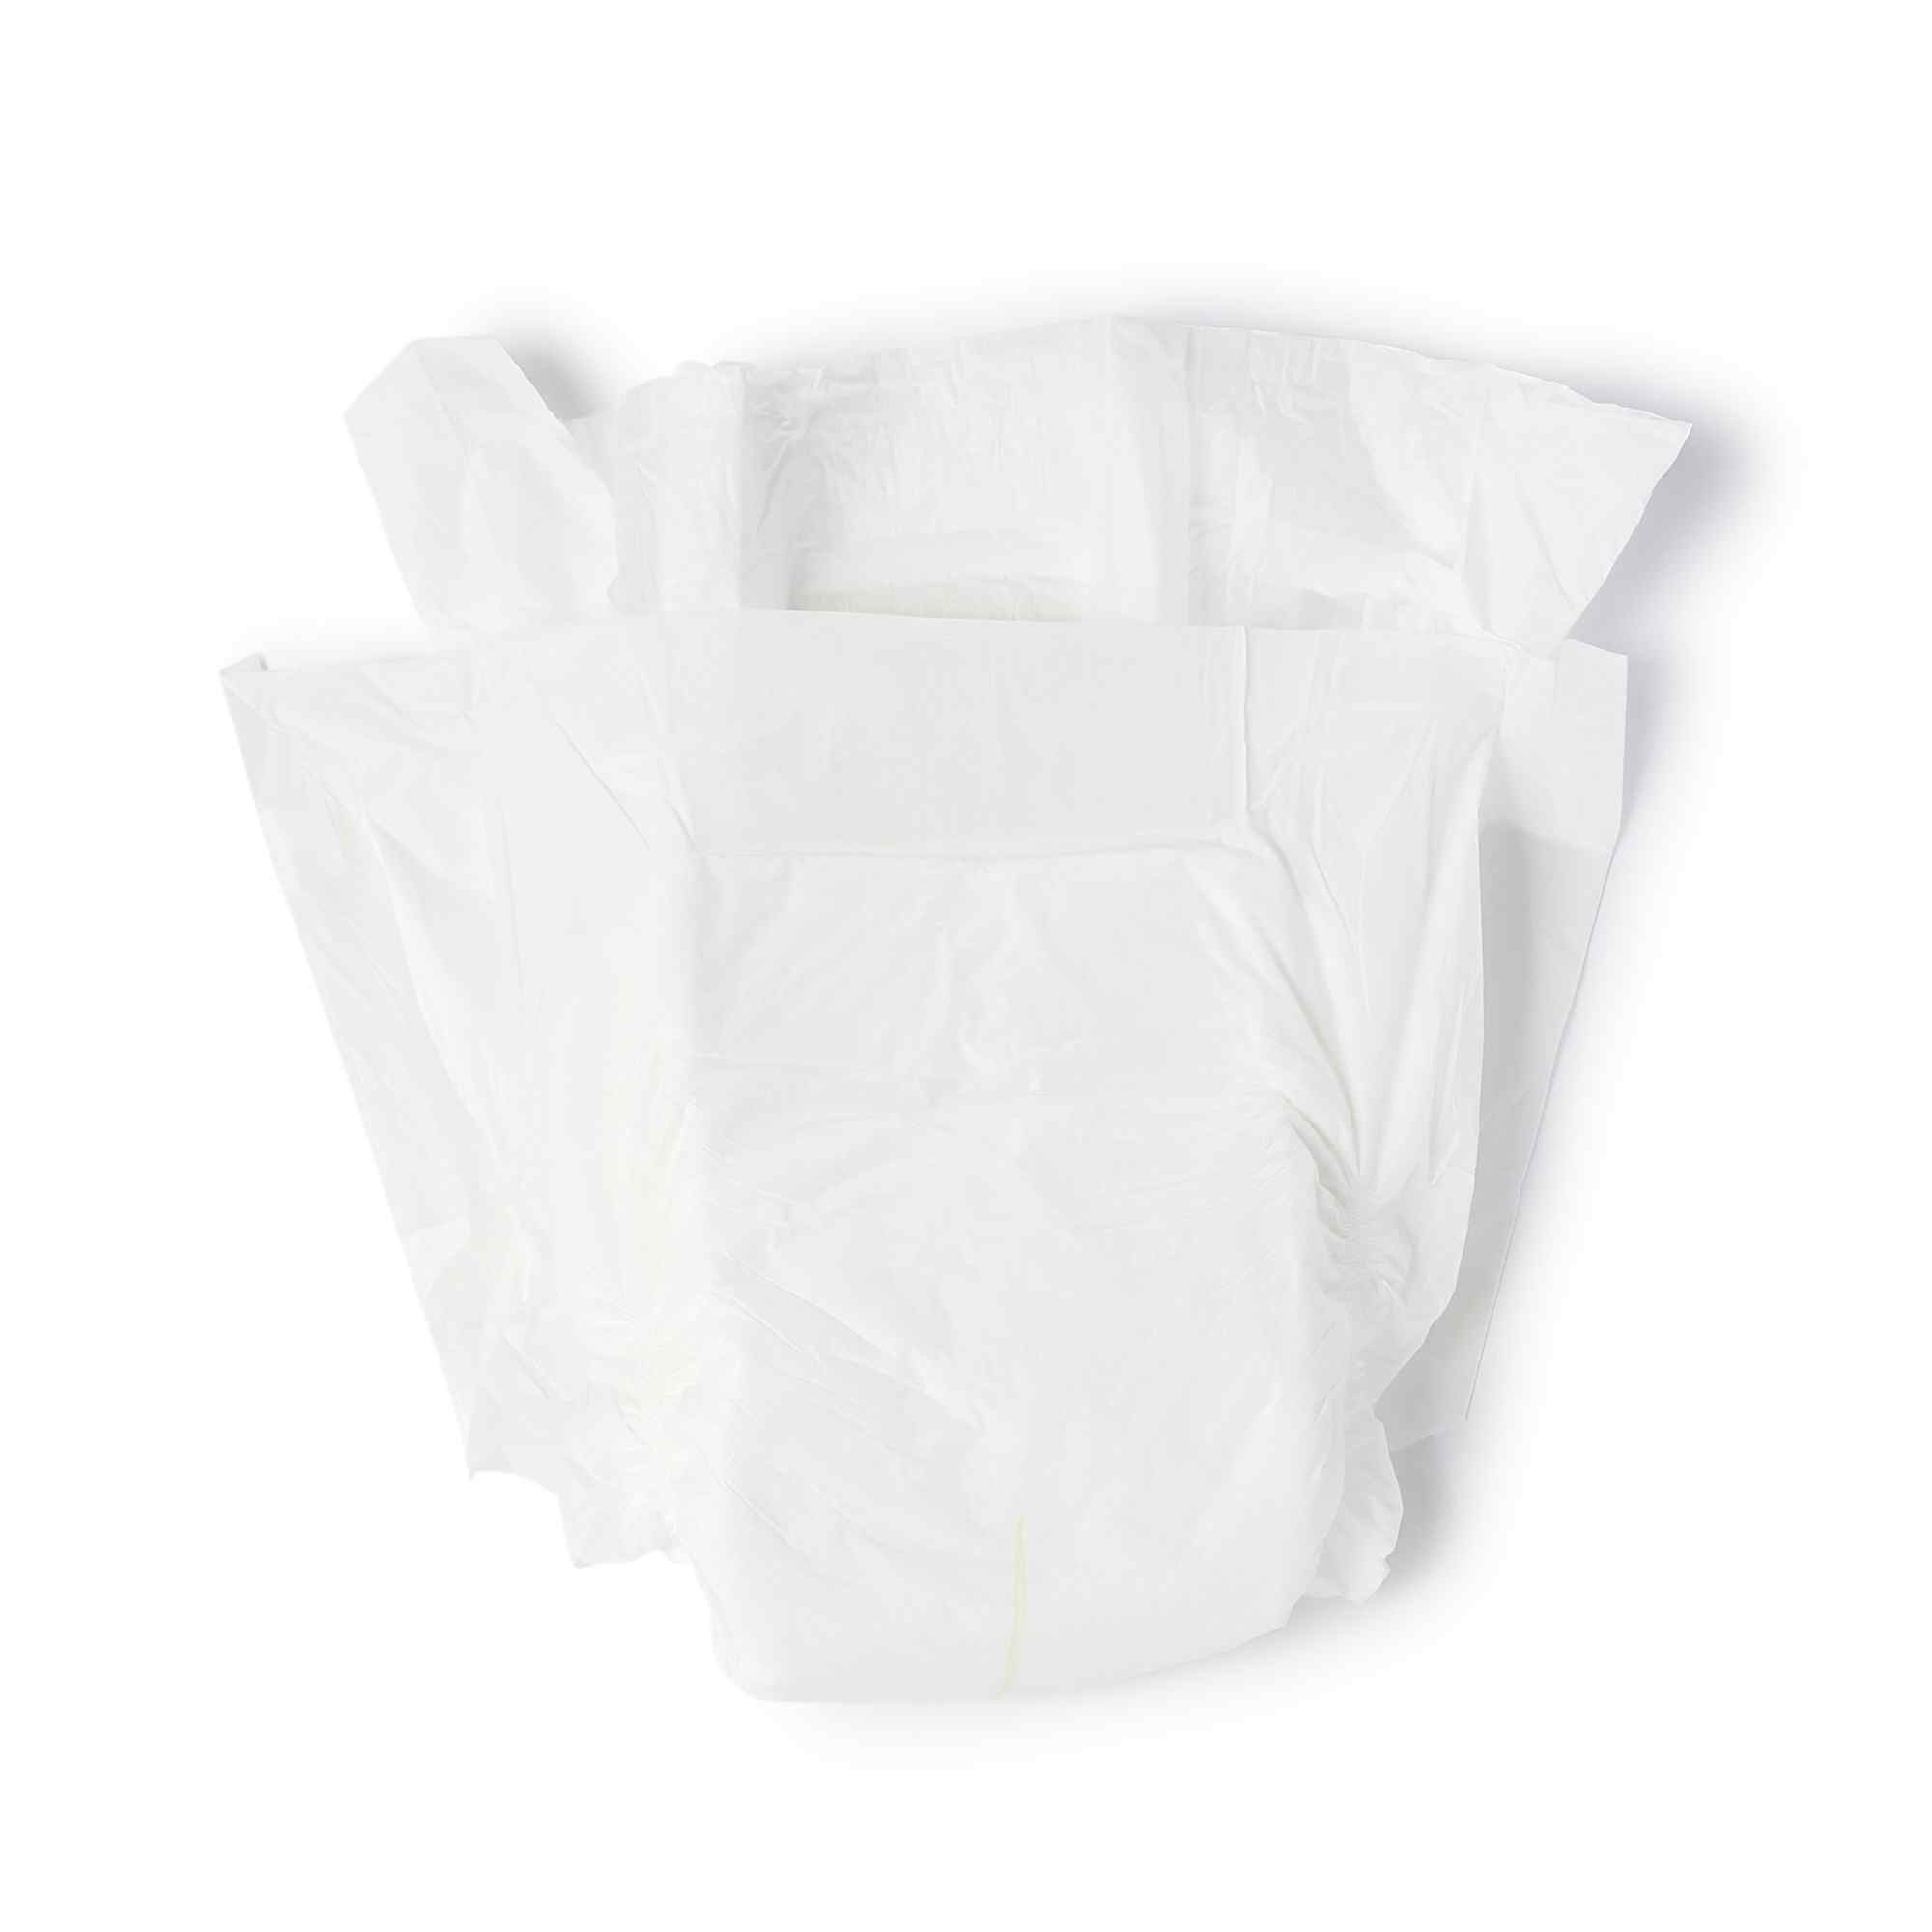 Wings Plus Unisex Adult Disposable Diaper with Tabs, Heavy Absorbency